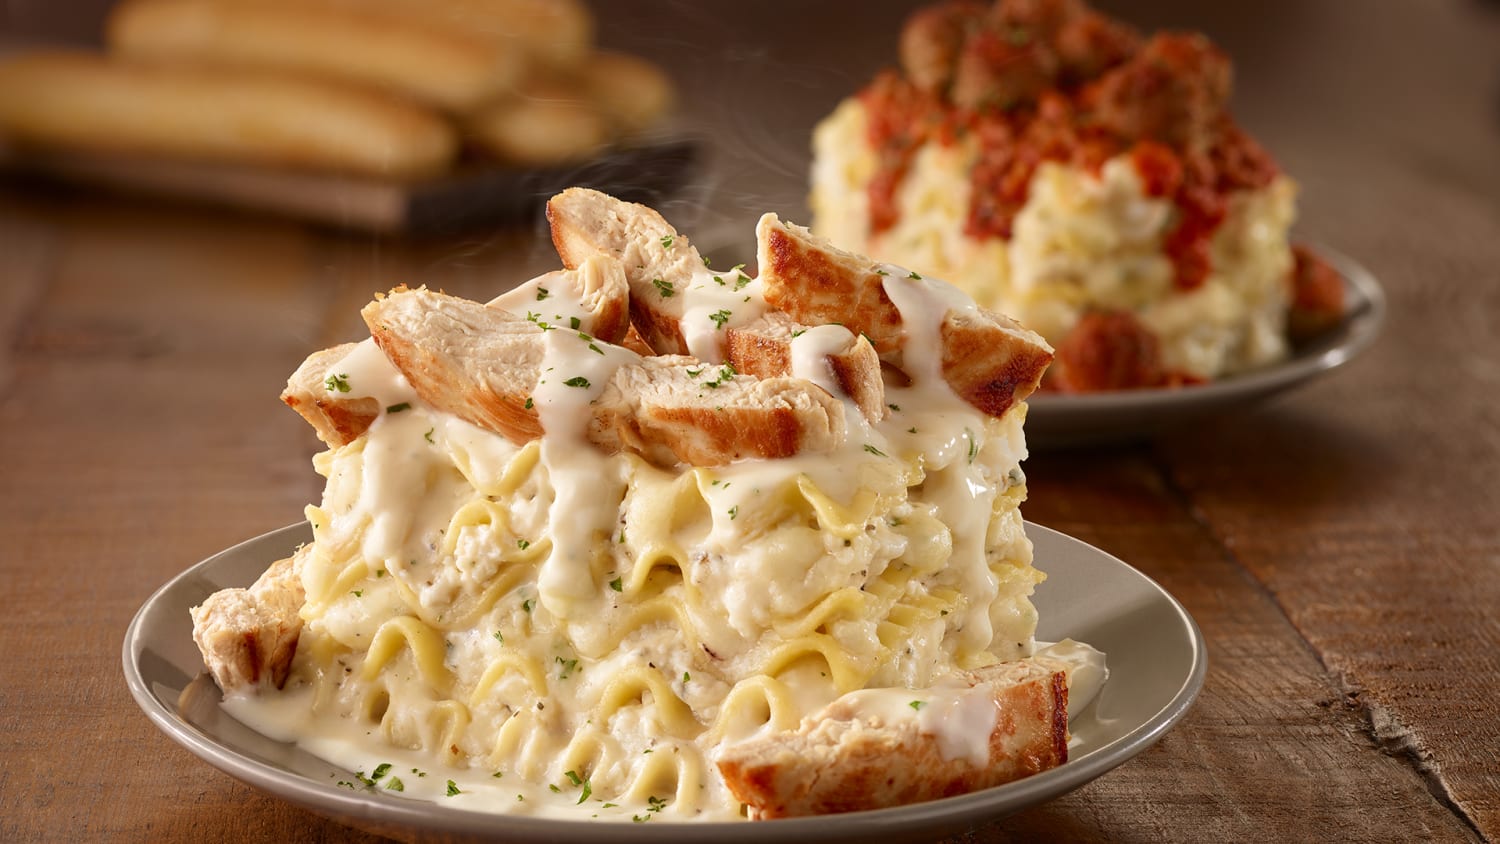 Olive Garden Make Your Own Lasagna With 24 Variations